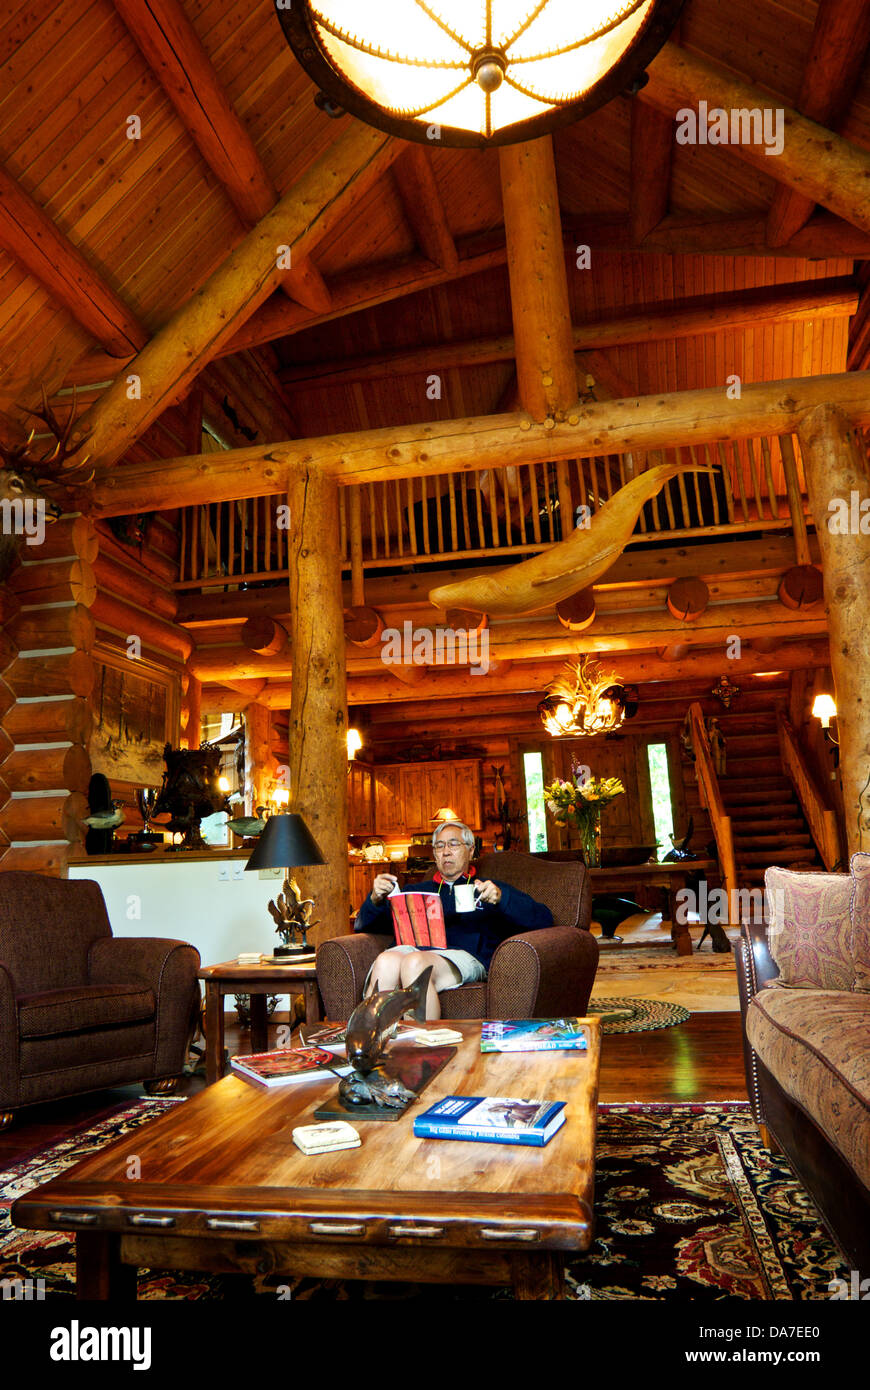 Asian man reading log beam construction wood plank walls stone fireplace great room Gold River Lodge BC Stock Photo